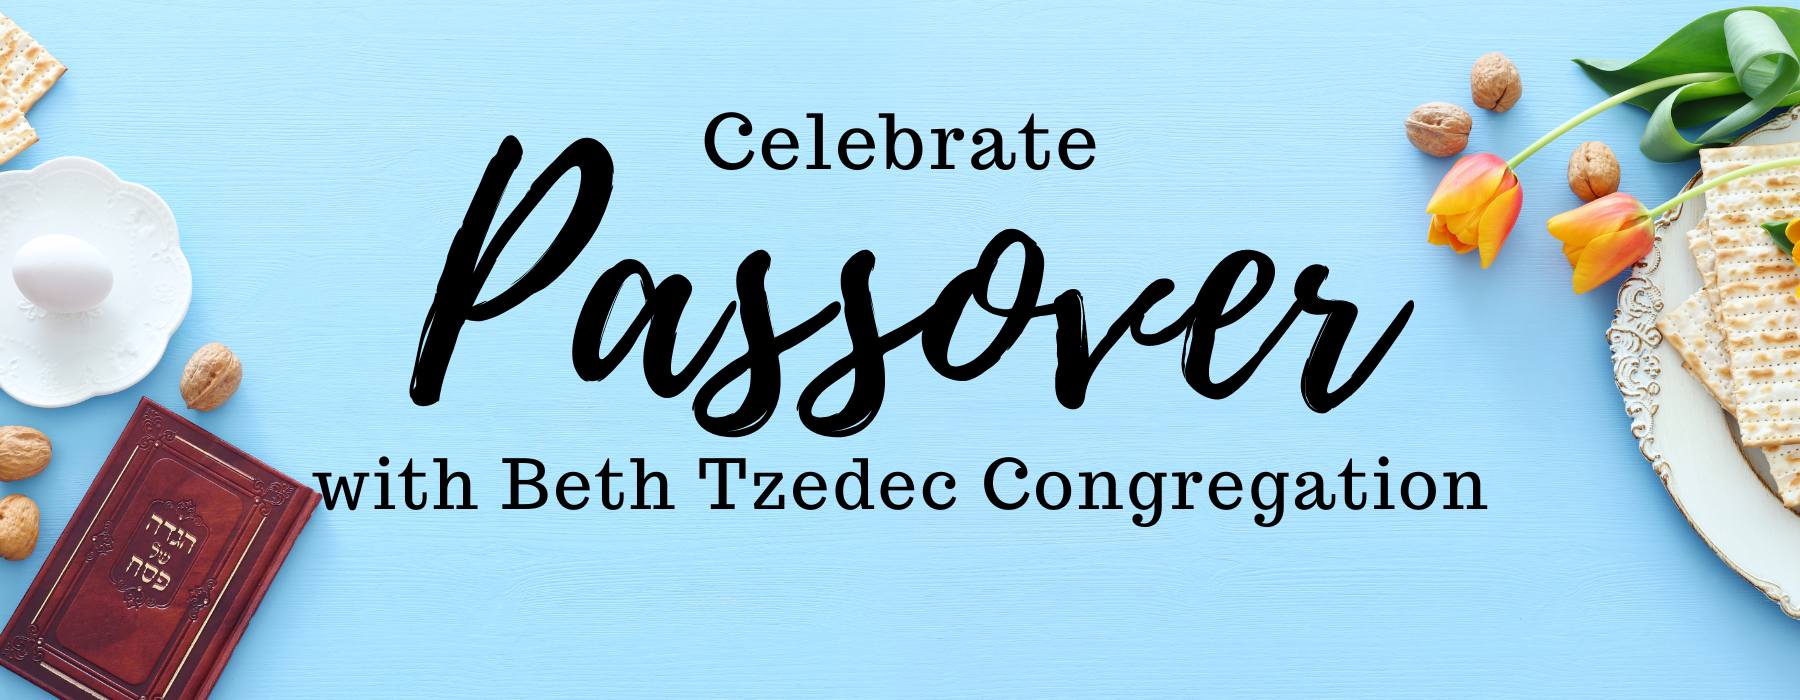 A graphic with text reading "Celebrate Passover with Beth Tzedec Congregation"